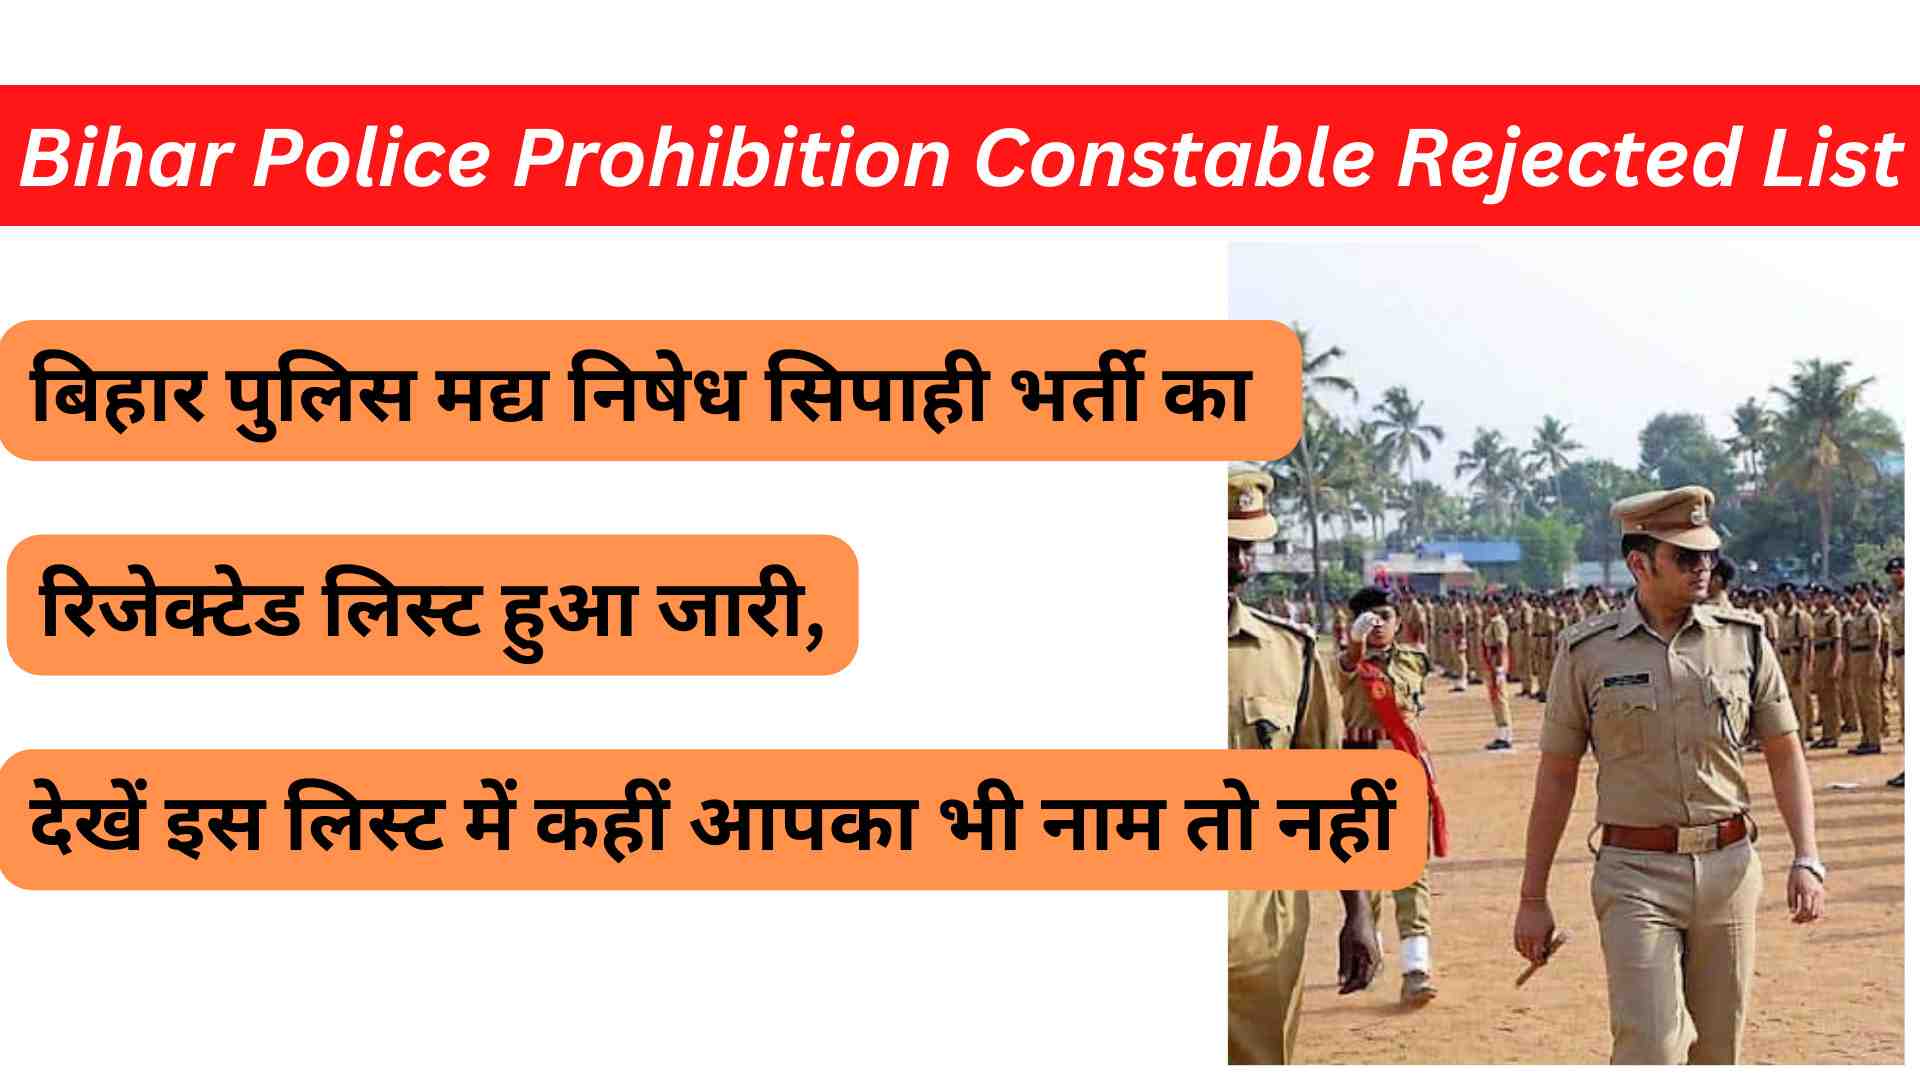 Bihar Police Prohibition Constable Rejected List 2022-23